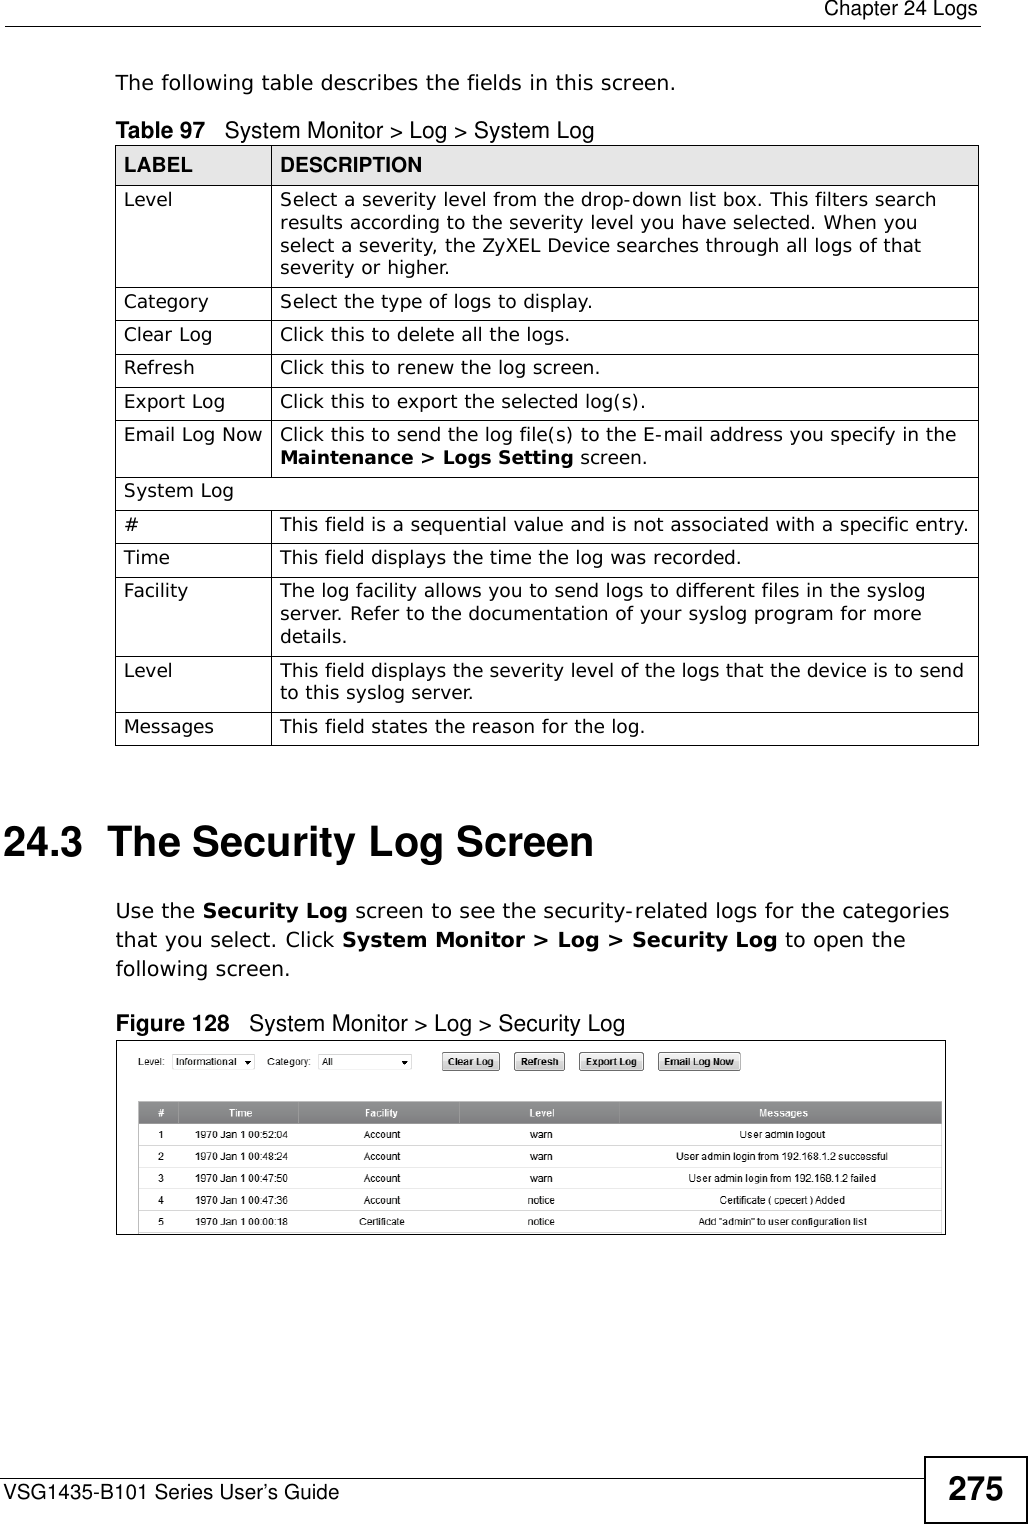  Chapter 24 LogsVSG1435-B101 Series User’s Guide 275The following table describes the fields in this screen.   24.3  The Security Log ScreenUse the Security Log screen to see the security-related logs for the categories that you select. Click System Monitor &gt; Log &gt; Security Log to open the following screen. Figure 128   System Monitor &gt; Log &gt; Security LogTable 97   System Monitor &gt; Log &gt; System LogLABEL DESCRIPTIONLevel Select a severity level from the drop-down list box. This filters search results according to the severity level you have selected. When you select a severity, the ZyXEL Device searches through all logs of that severity or higher. Category Select the type of logs to display.Clear Log  Click this to delete all the logs. Refresh Click this to renew the log screen. Export Log Click this to export the selected log(s).Email Log Now Click this to send the log file(s) to the E-mail address you specify in the Maintenance &gt; Logs Setting screen.System Log#This field is a sequential value and is not associated with a specific entry.Time  This field displays the time the log was recorded. Facility  The log facility allows you to send logs to different files in the syslog server. Refer to the documentation of your syslog program for more details.Level This field displays the severity level of the logs that the device is to send to this syslog server.Messages This field states the reason for the log.